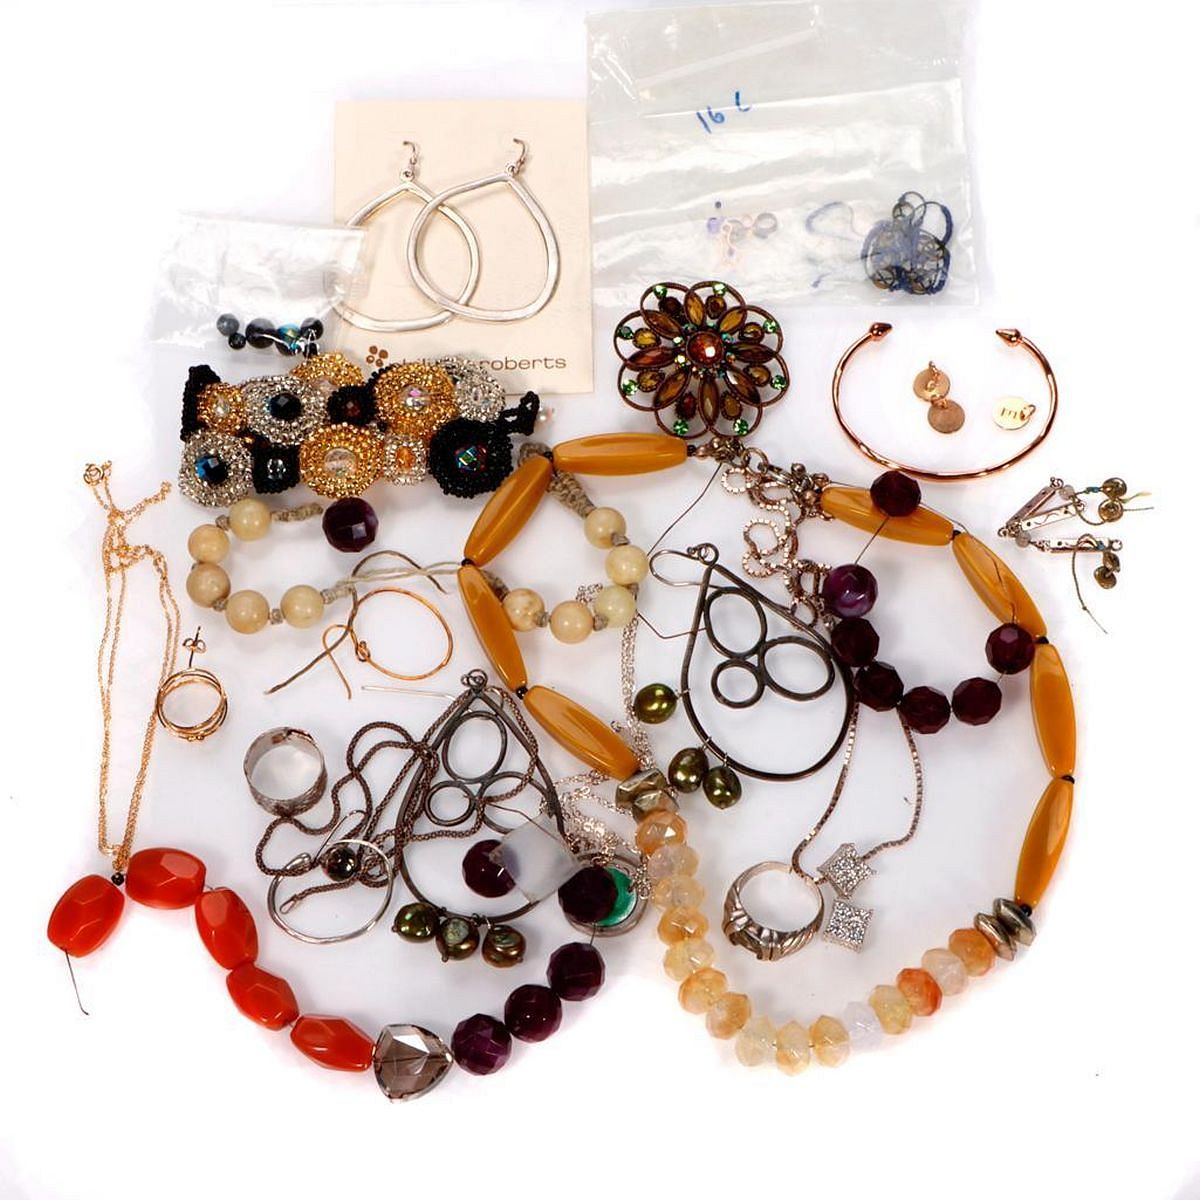 Collection of jewelry for sale at auction on 22nd April | Bidsquare